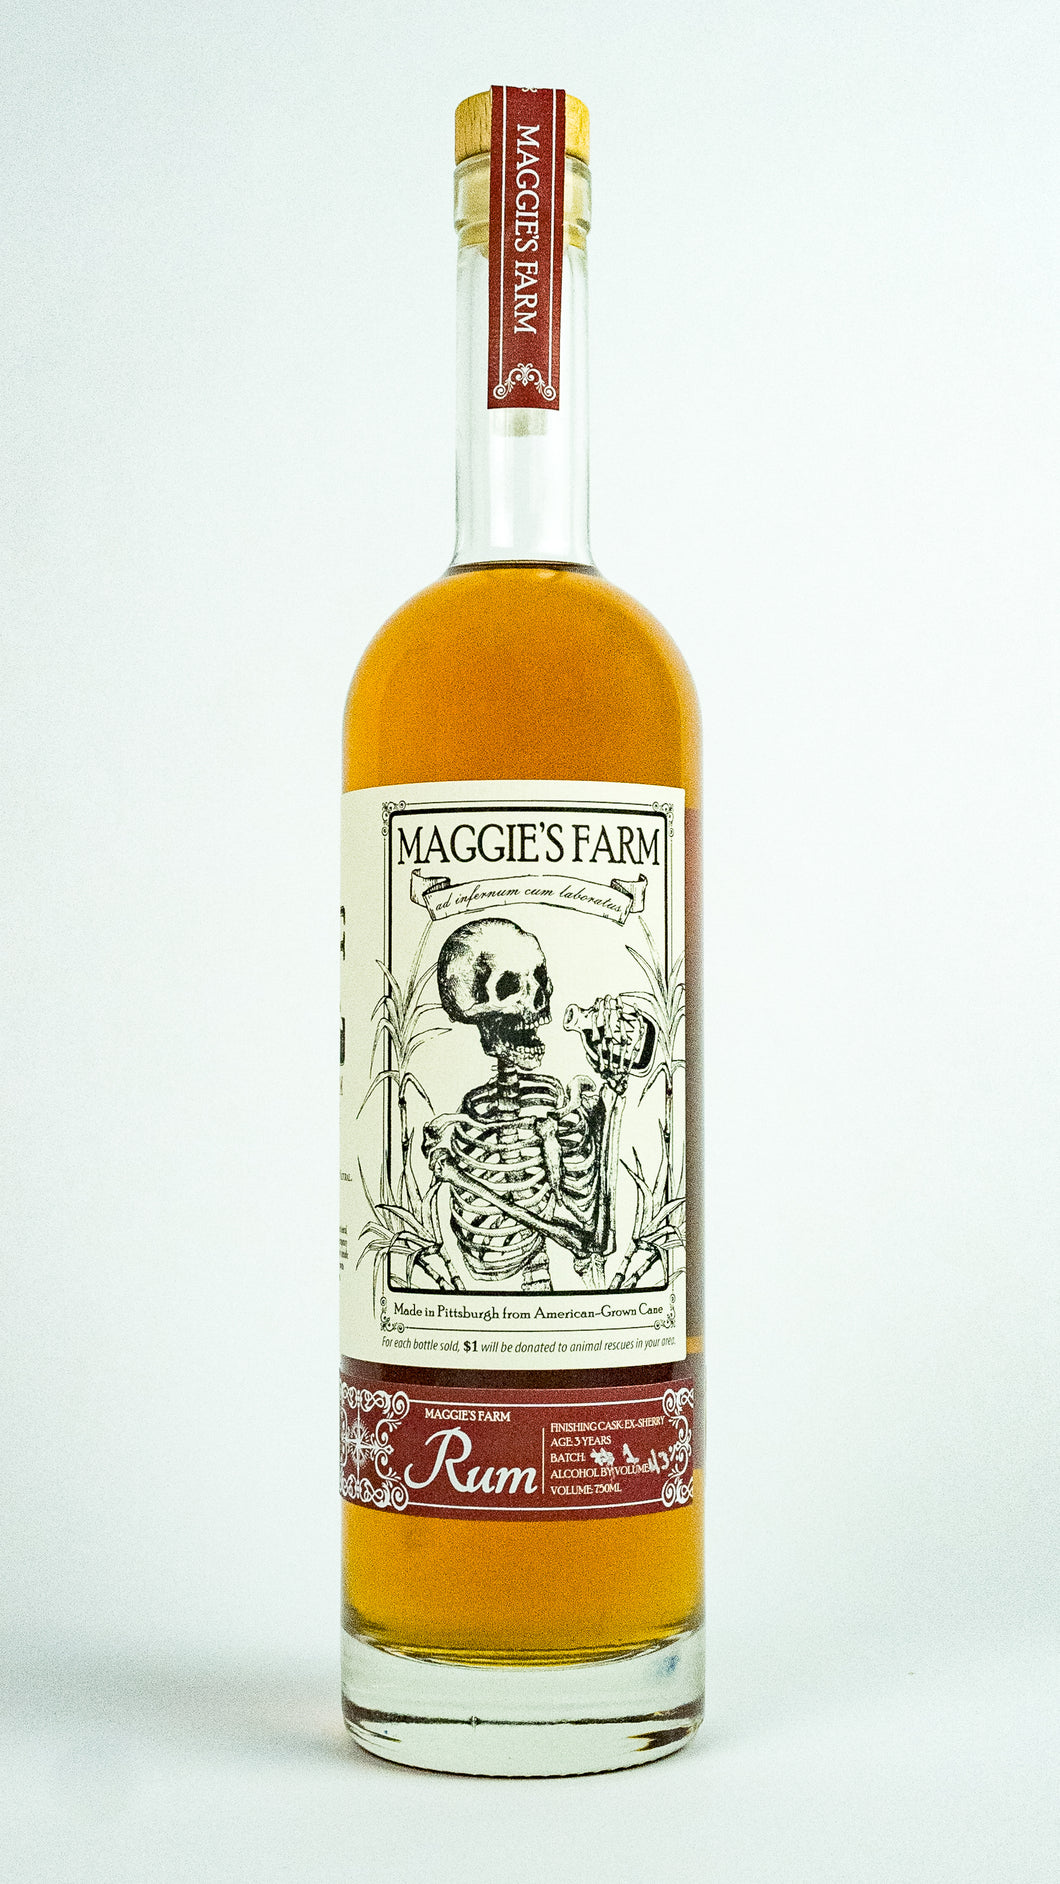 Maggie's Farm Sherry-Cask Finish Aged Rum - 750ml - 90proof